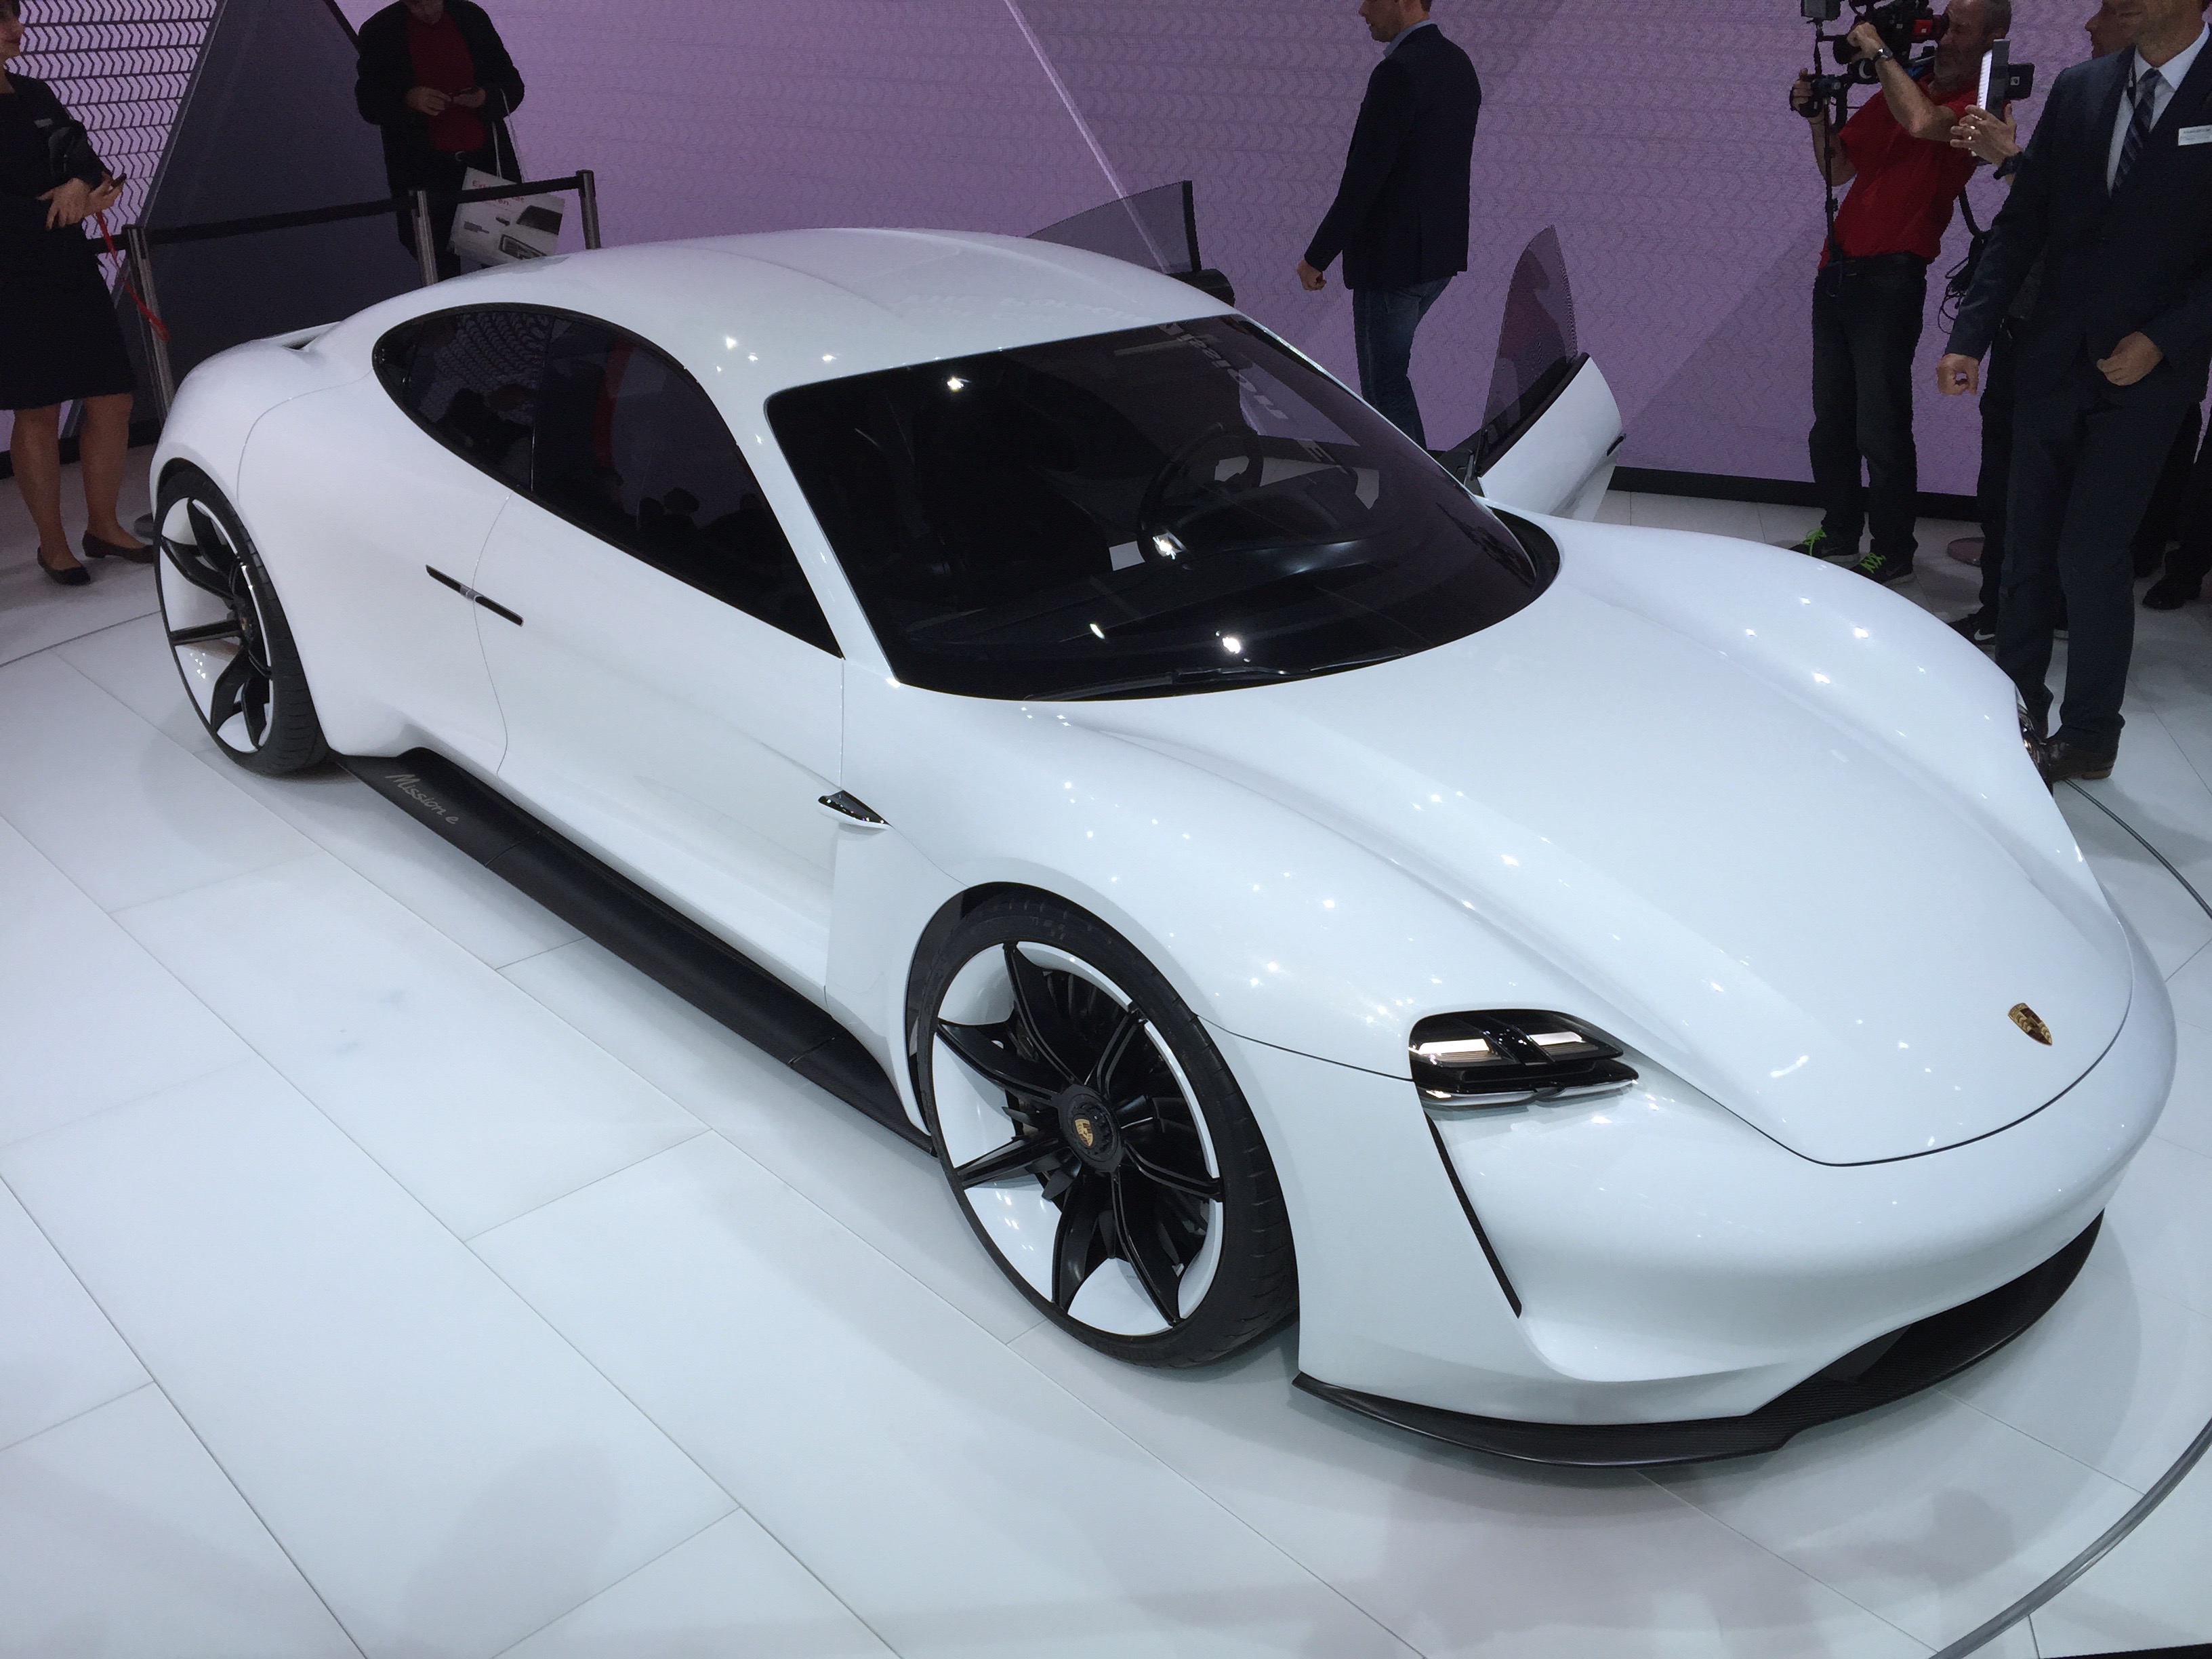 Porsche S 800 Volt Fast Charging For Electric Cars Why It Matters